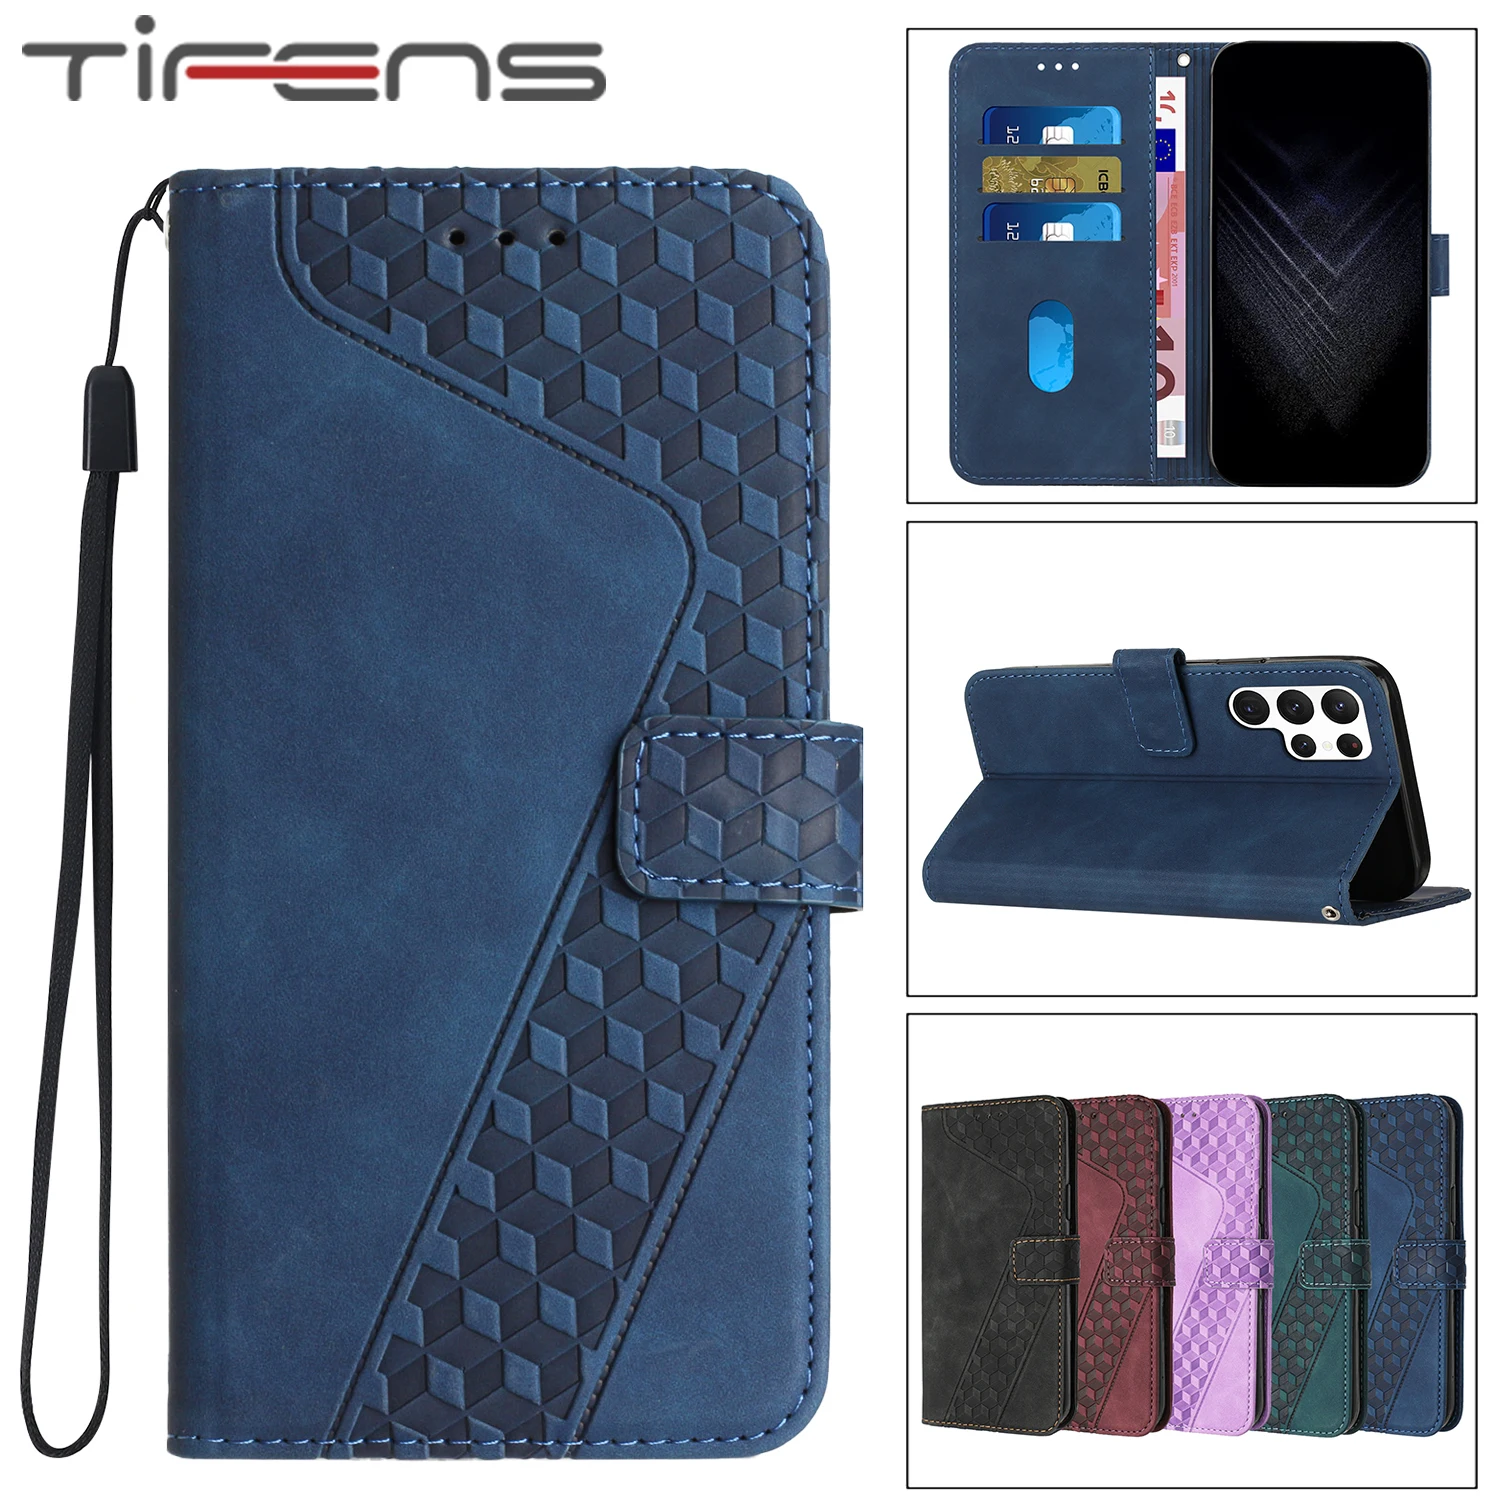 

Leather Phone Bag Case For Samsung Galaxy A71 A51 A41 A31 A21 A11 A01 A70 A50 A40 A30 A20 A10 S E A81 A91 Flip Wallet Card Cover